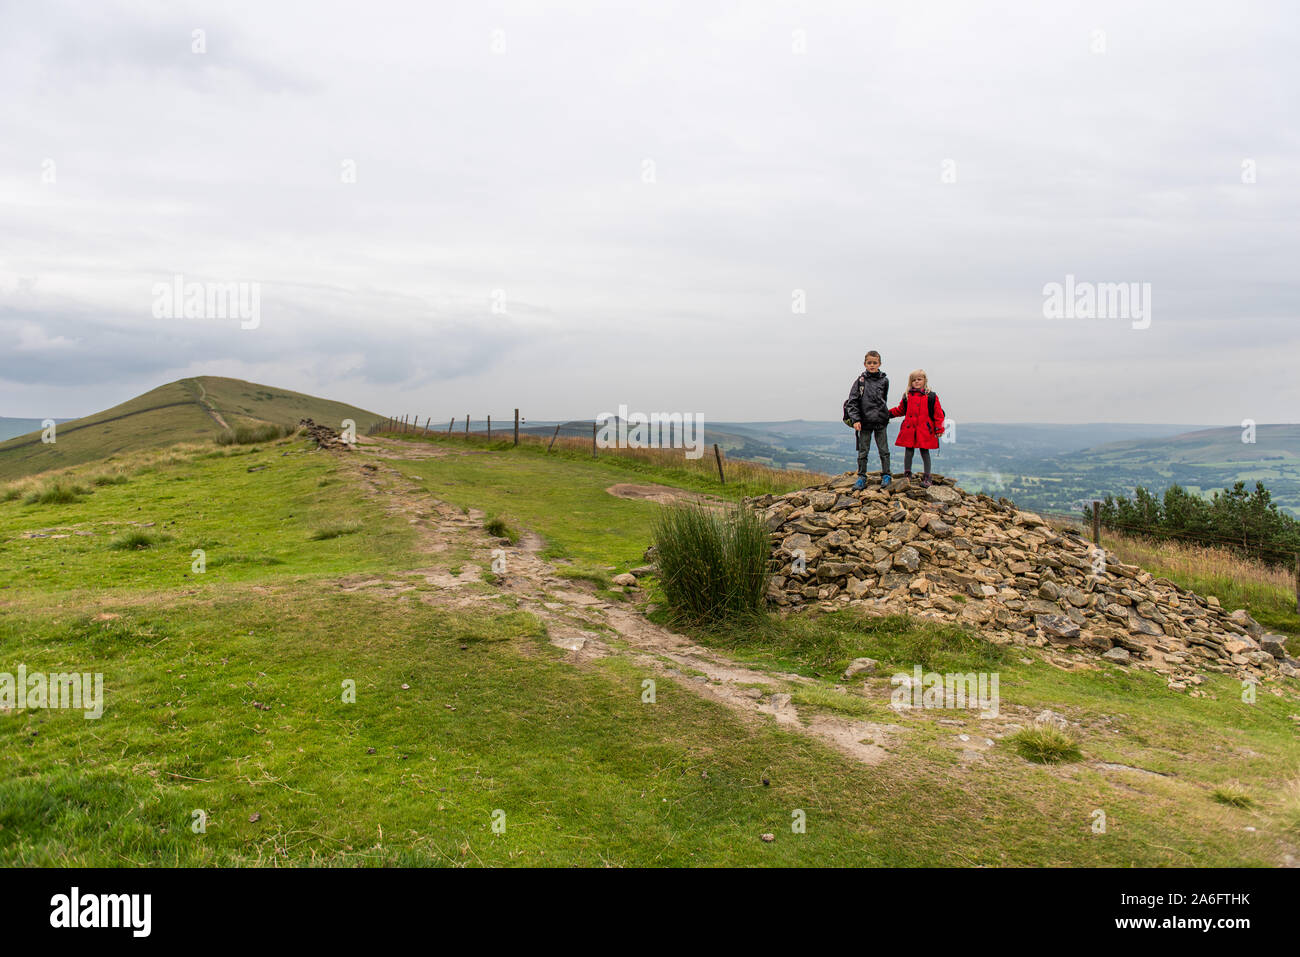 A boy with ADHD, Autism, Aspergers Syndrome, enjoys a day out hiking with his sister at the Great Ridge and Mam Tor, in the Derbyshire Peak District Stock Photo